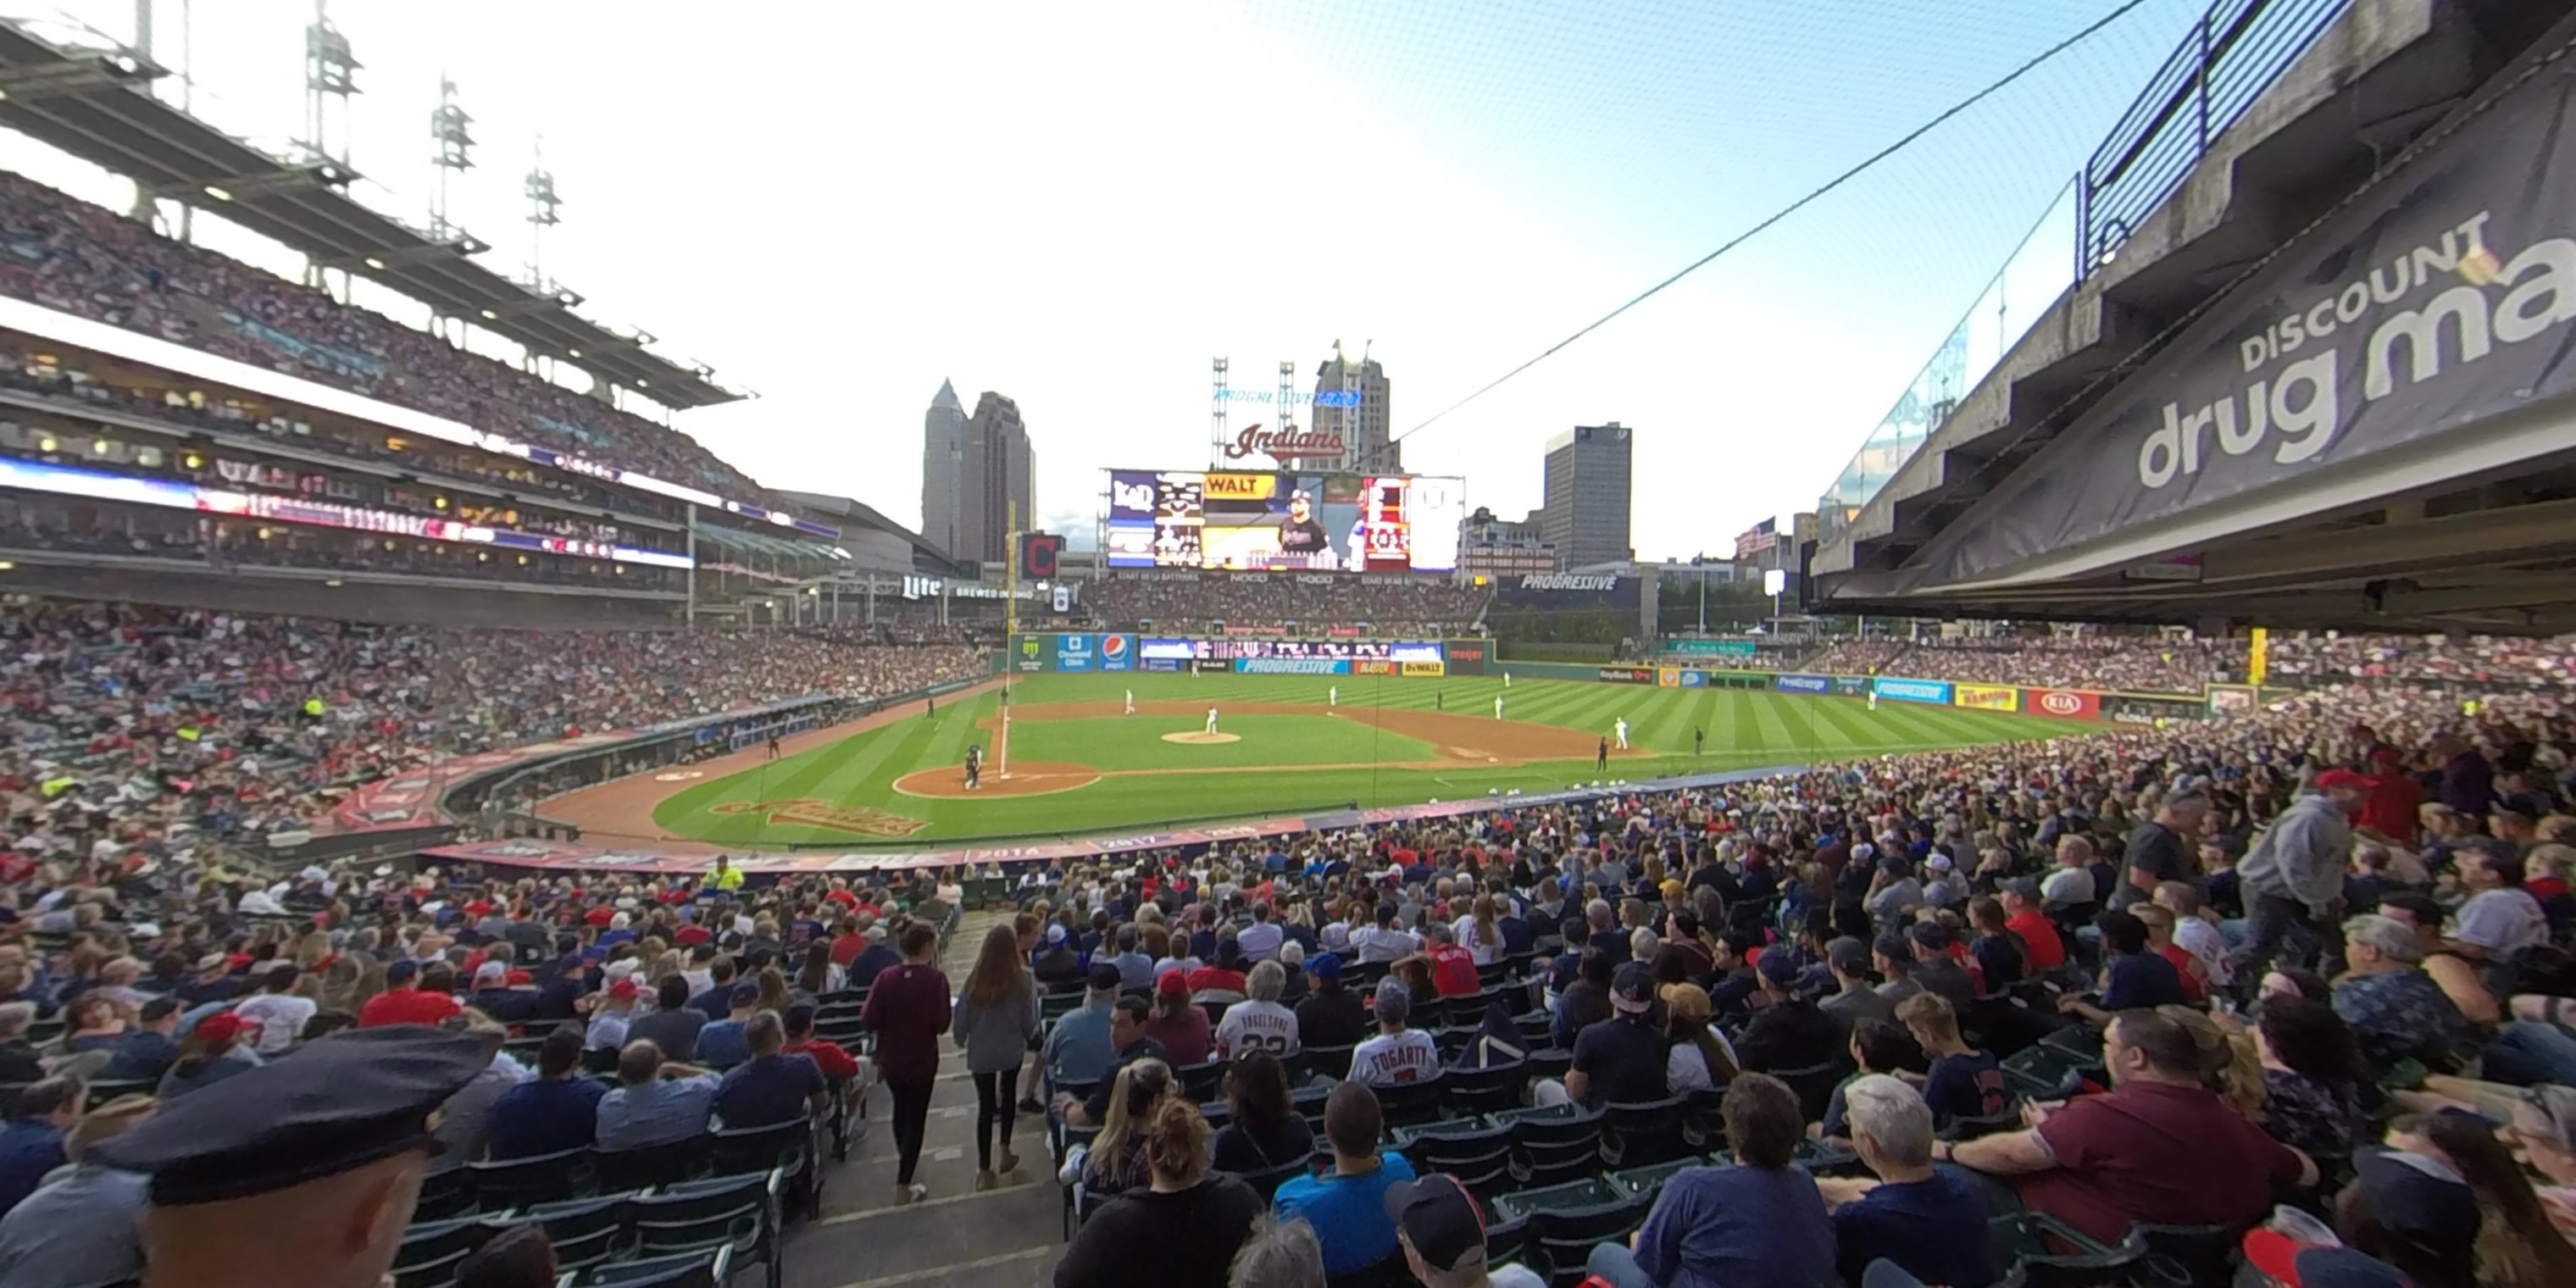 section 149 panoramic seat view  - progressive field